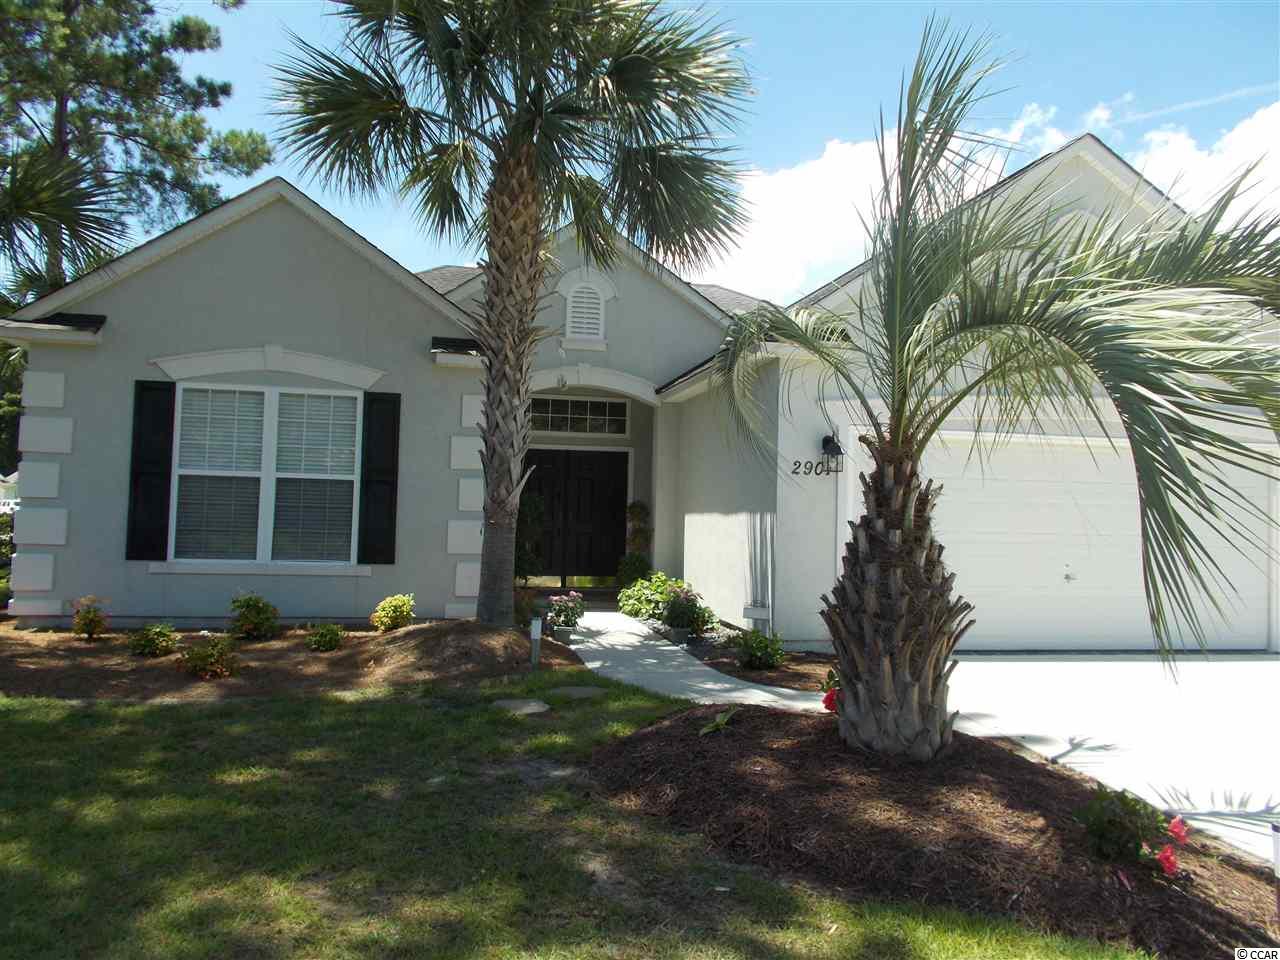 2901 Whooping Crane Dr. North Myrtle Beach, SC 29582